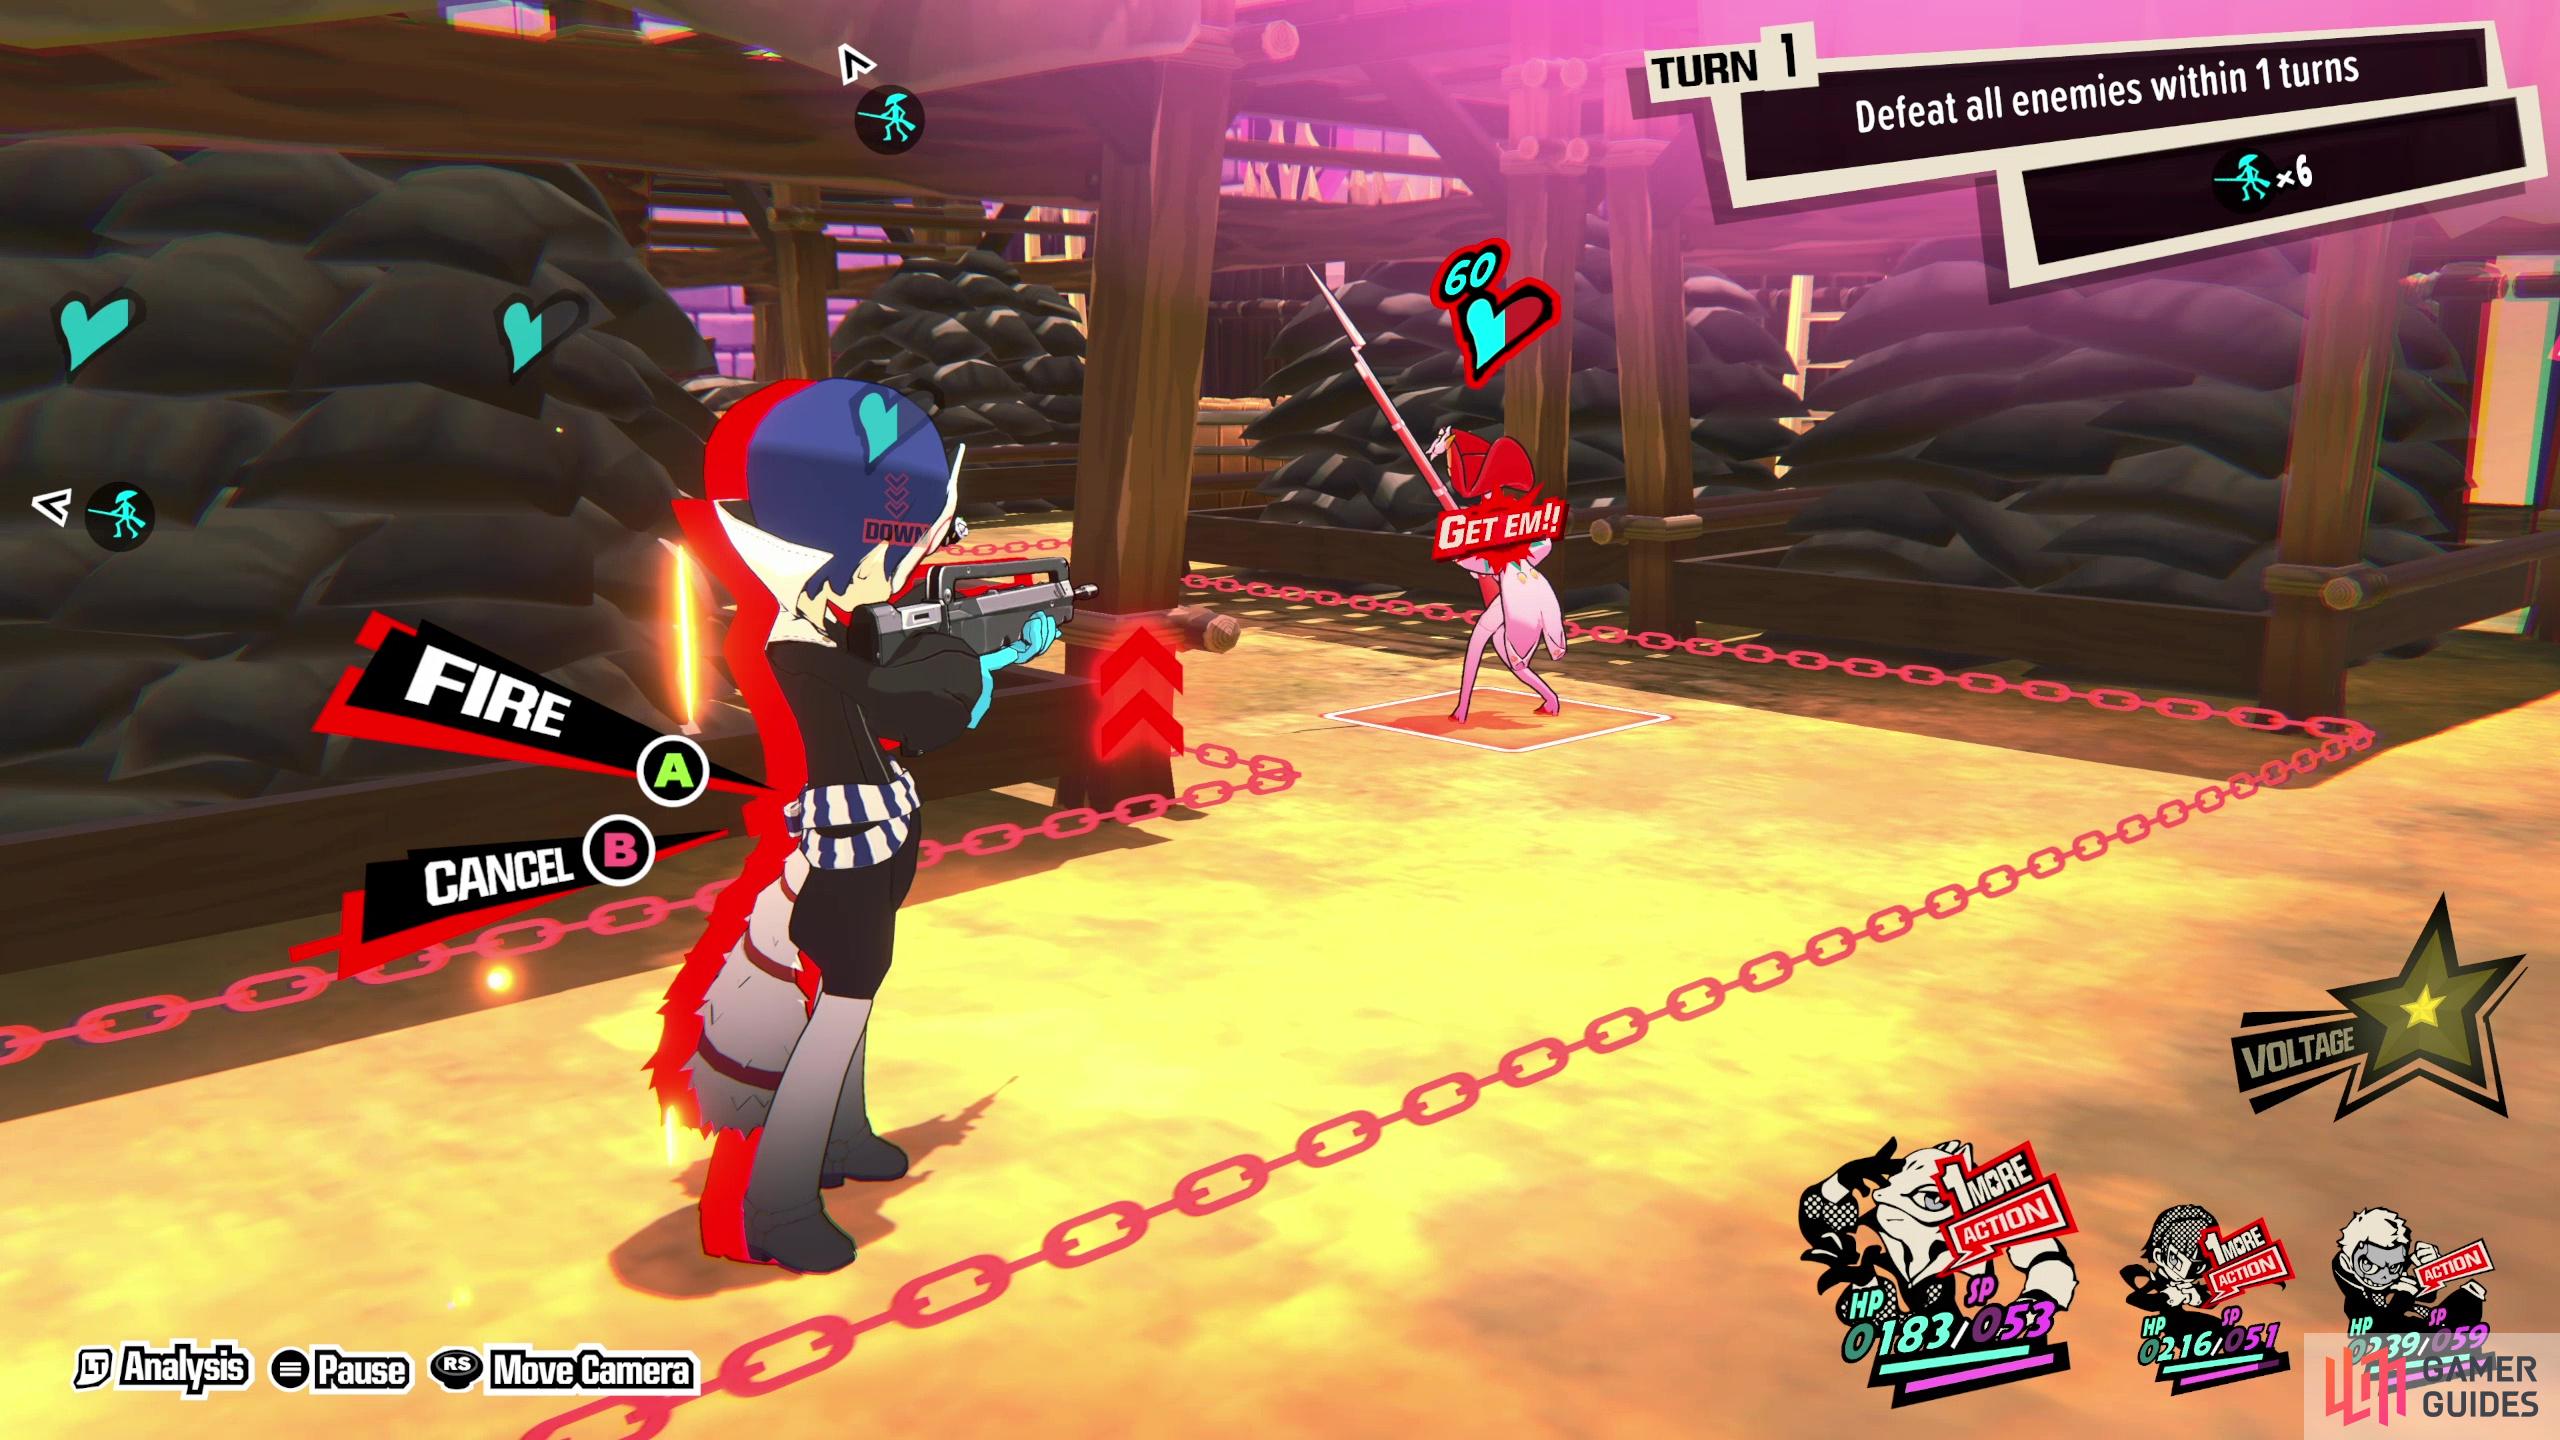 With Yusuke's second One More, climb down a ladder and shoot an exposed enemy to trigger a third One More.